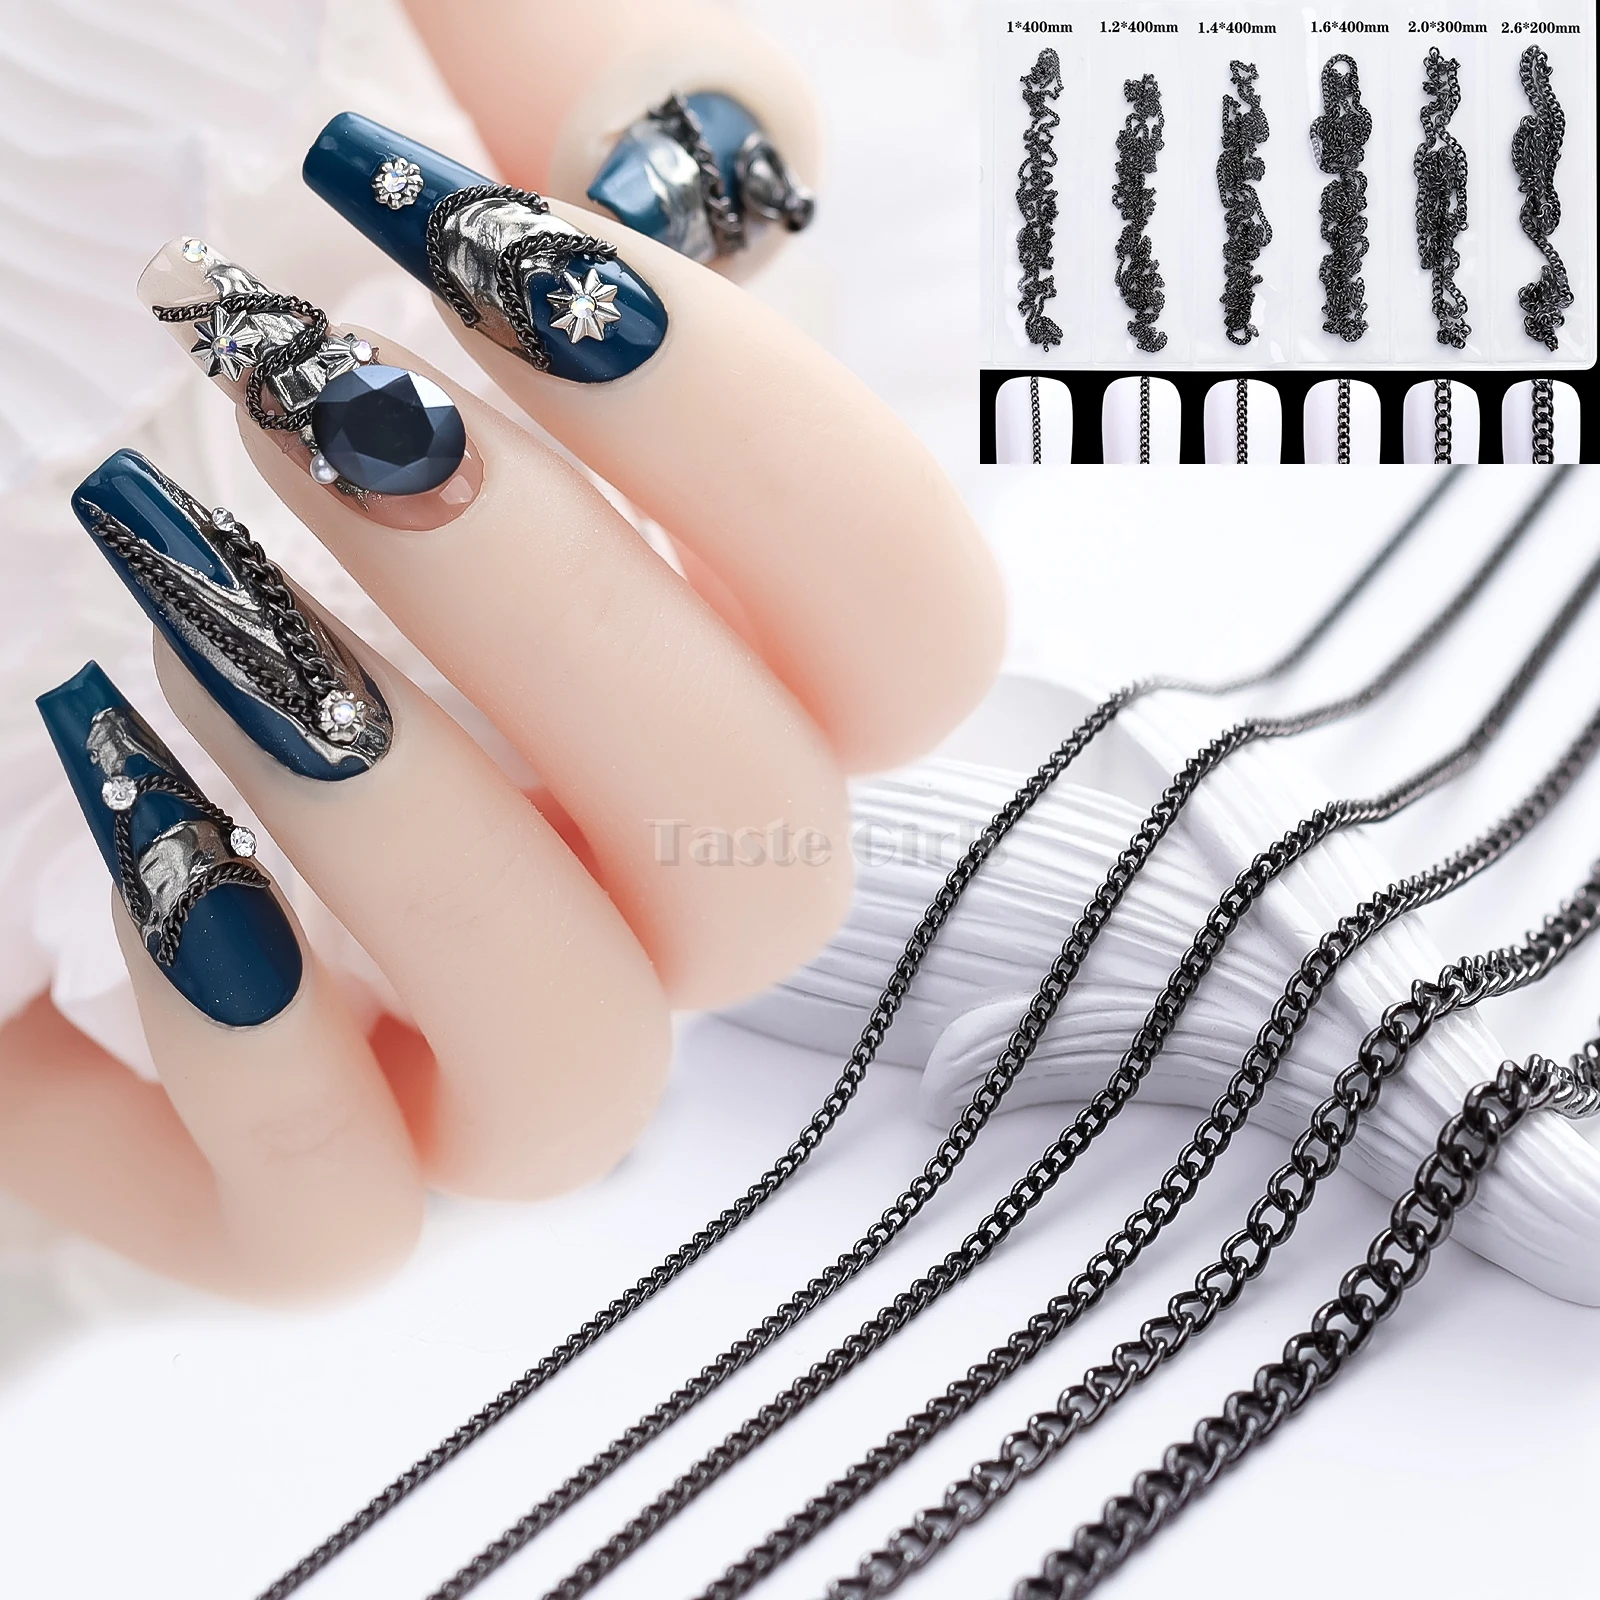 Mix 6 Shapes Colors 3D Ring Buckle Jewel Claw Metal Nail Chains Alloy Nail Art Rhinestone Studs Decorations Manicure Ornaments